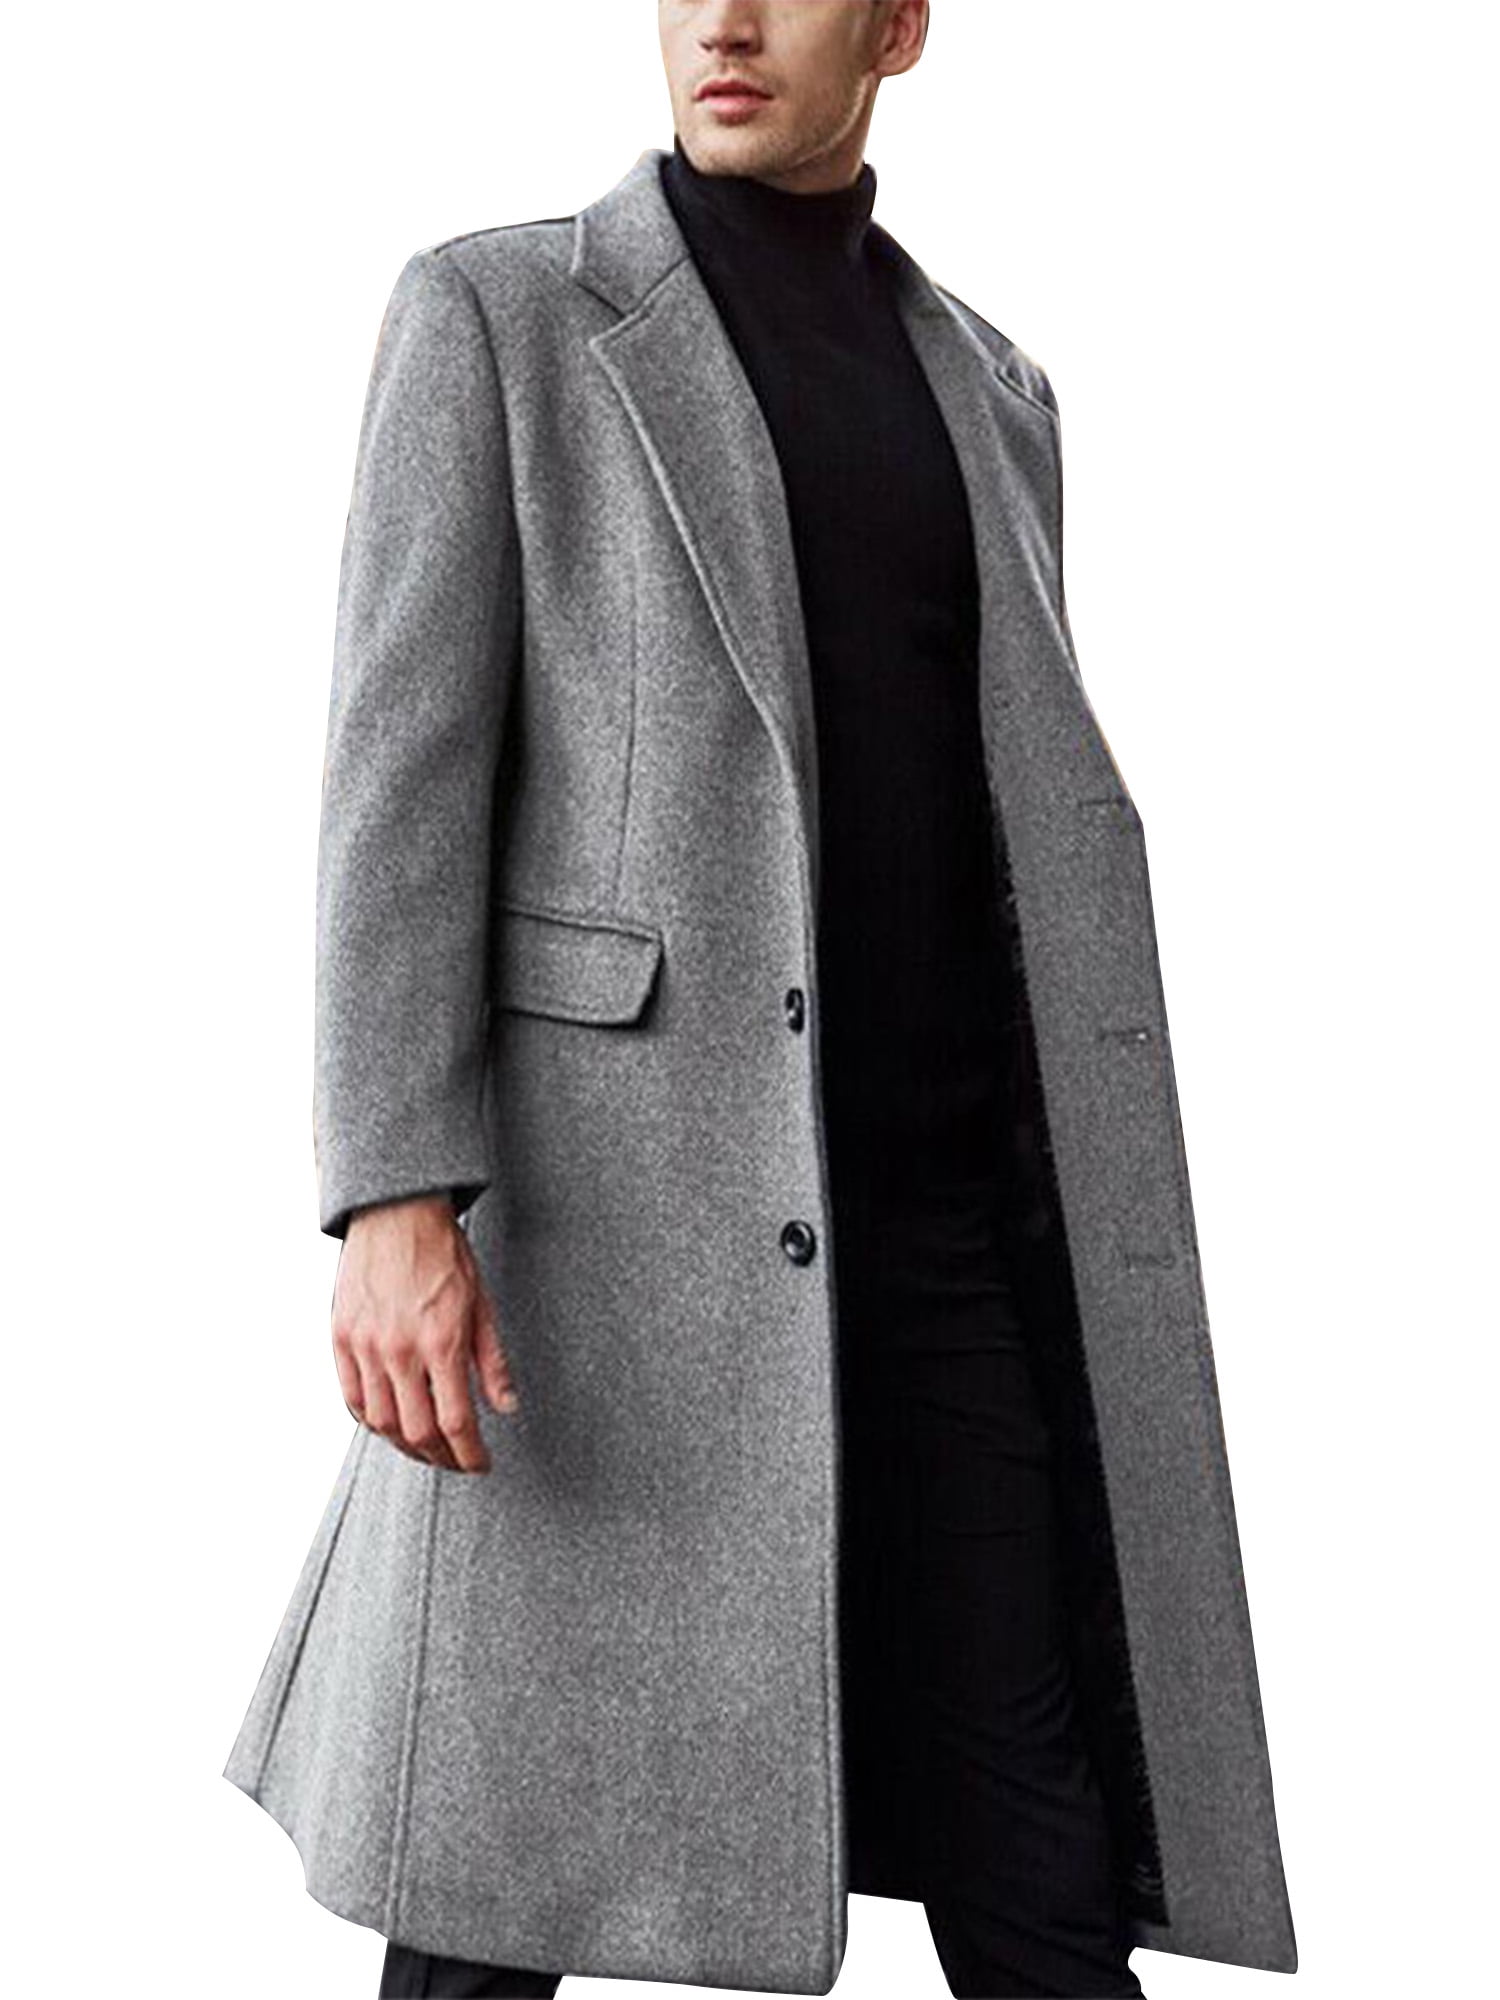 Mens Classic Fit Trench Coat Long Double Breasted Overcoat Outerwear Pea Coat